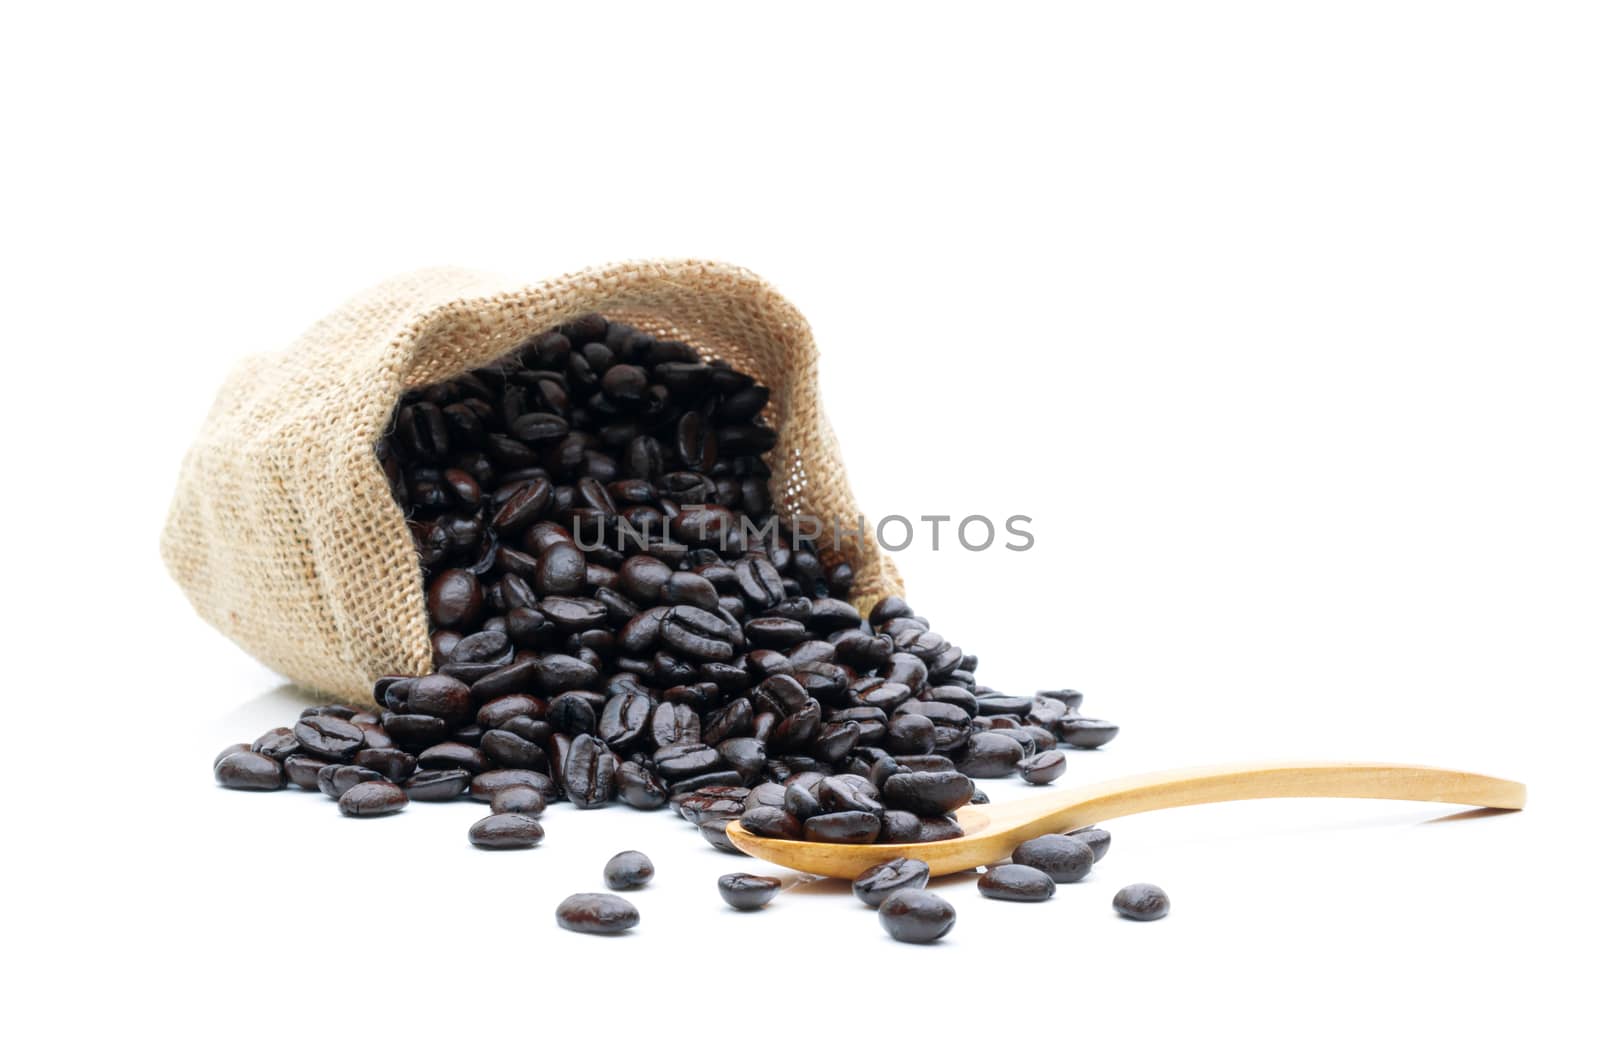 Roasted coffee beans in a sack of cloth on a white background by sompongtom